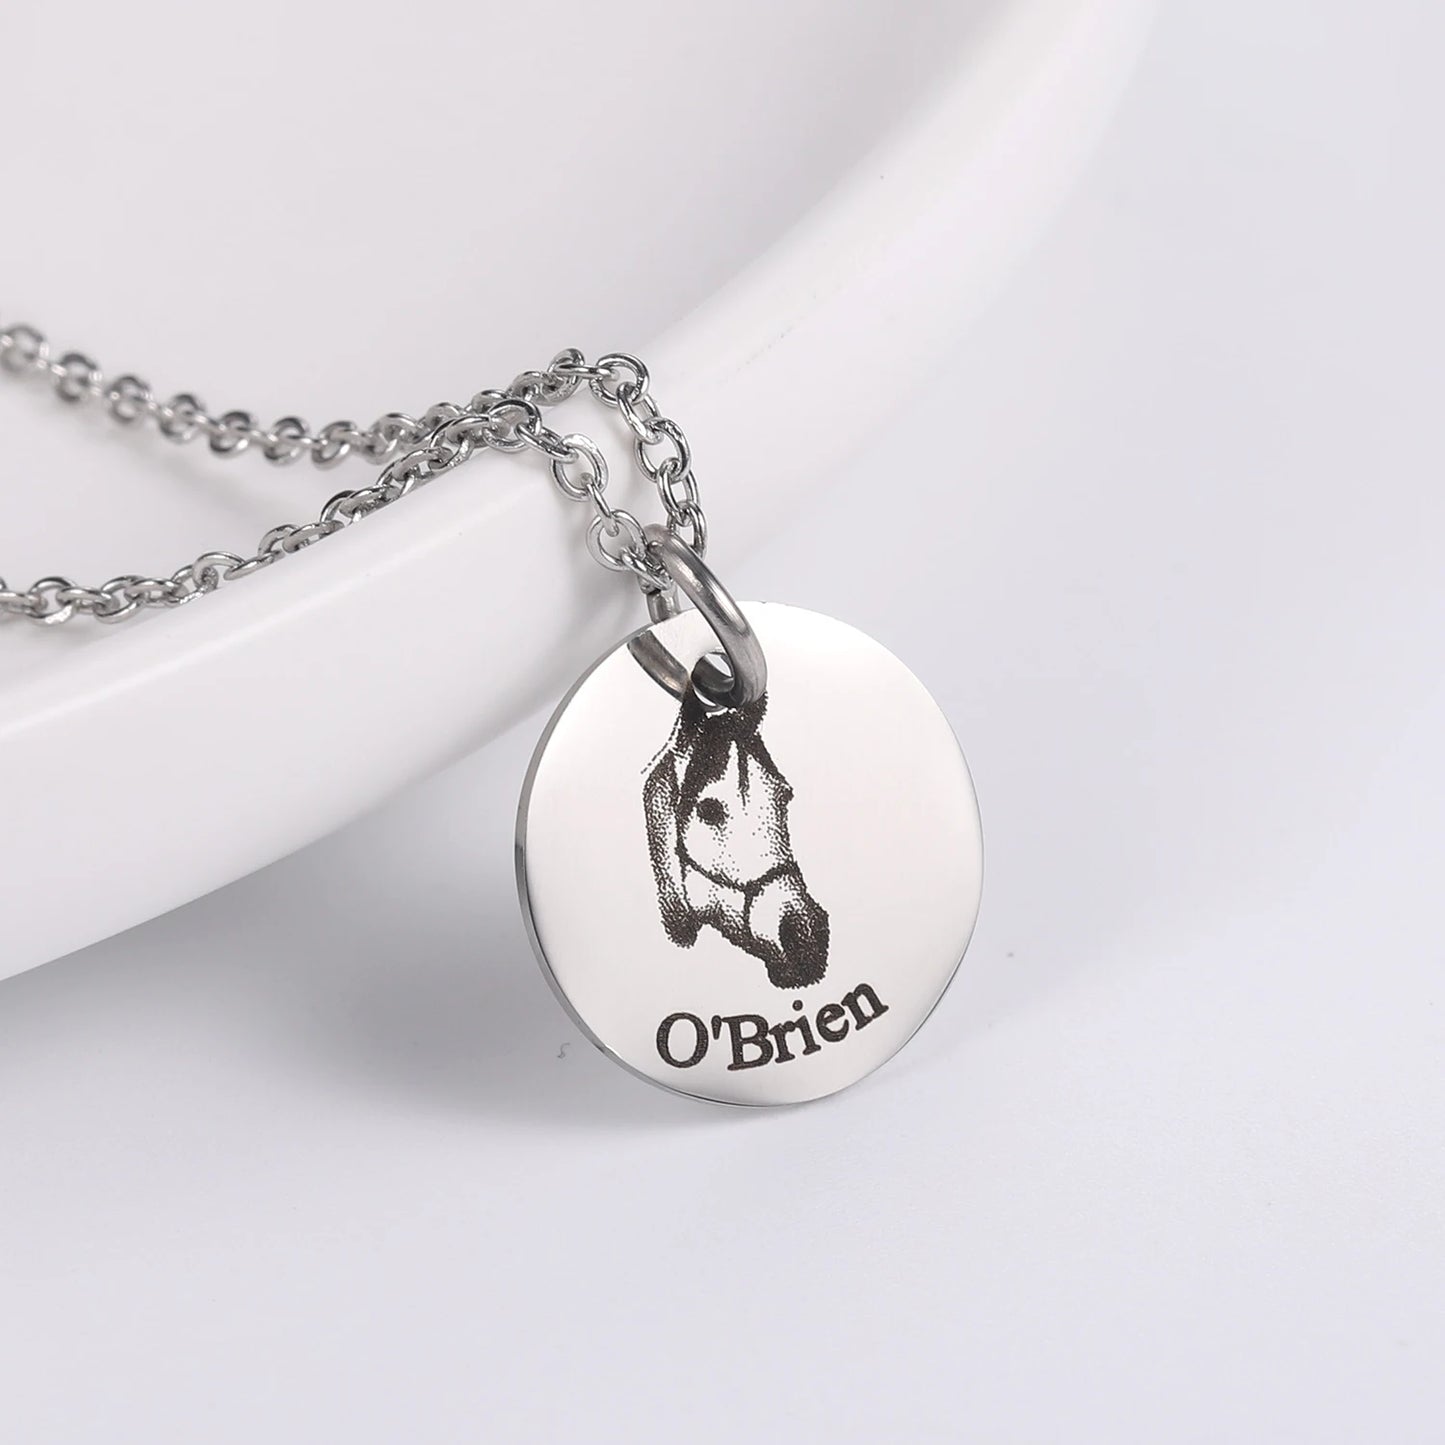 Personalized Pet Photo Initial Date Necklace